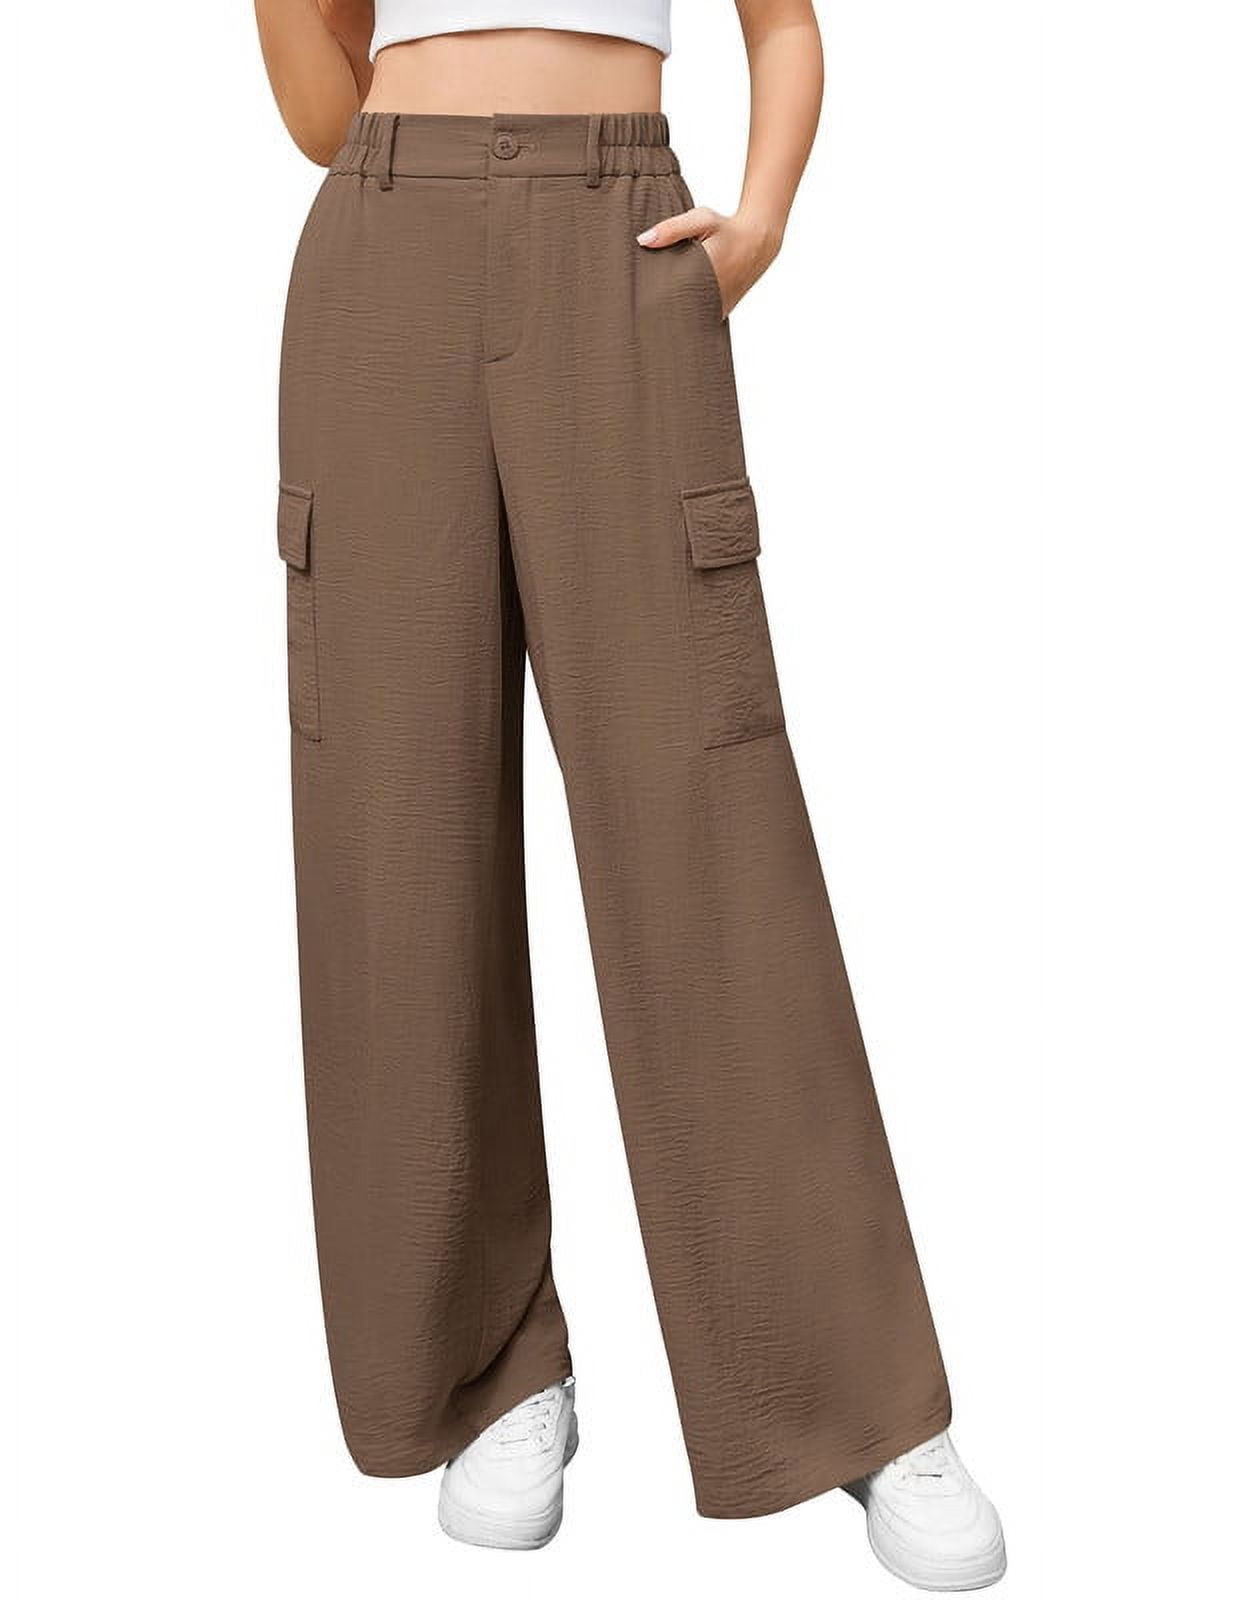 Uvplove Womens High Waisted Wide Leg Cargo Pants Baggy Casual Work ...